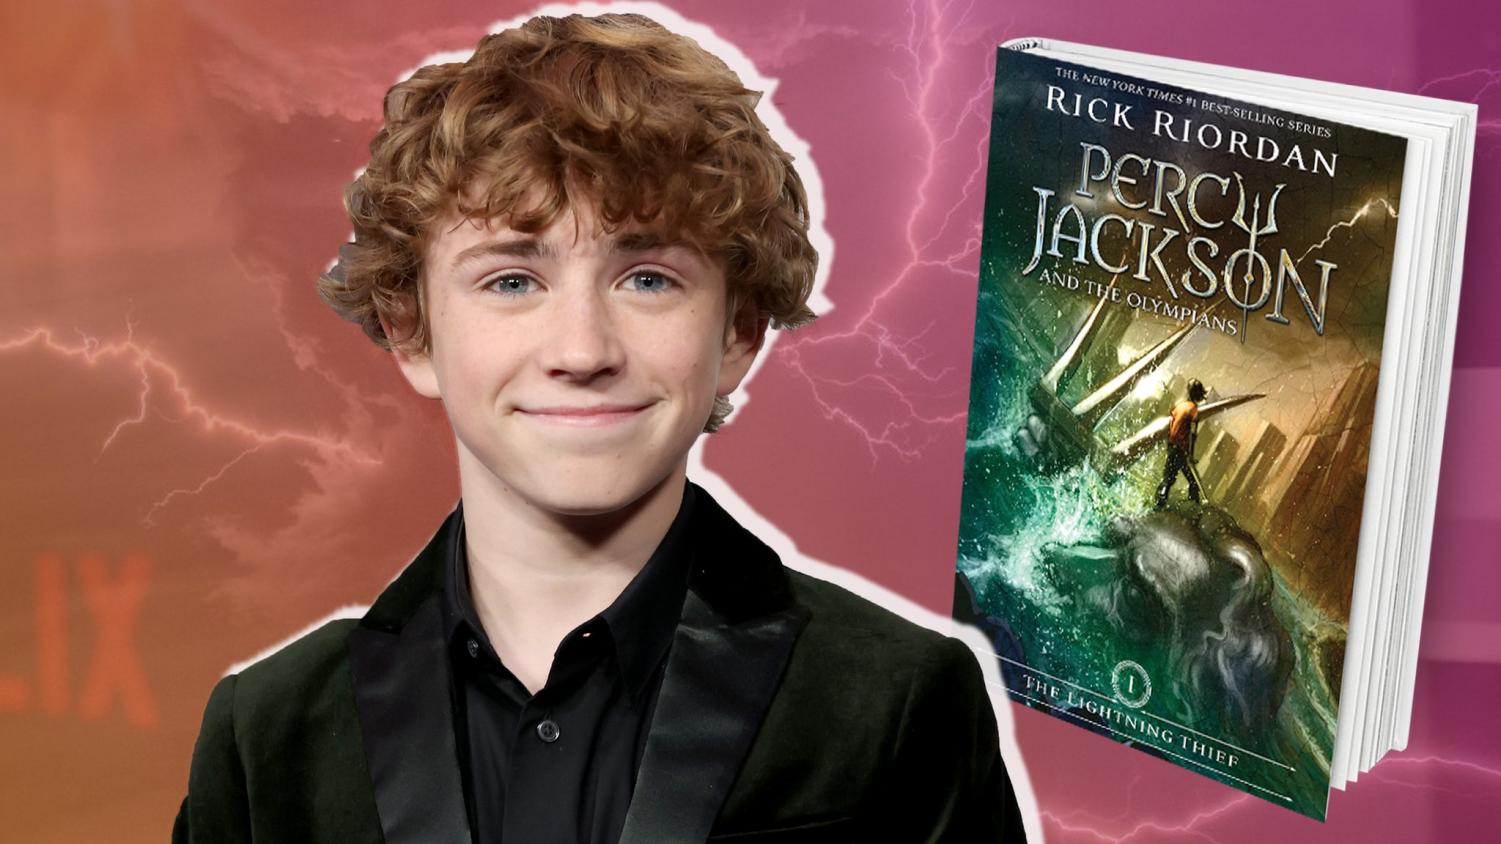 Percy Jackson and the Olympians (TV series) - Wikipedia